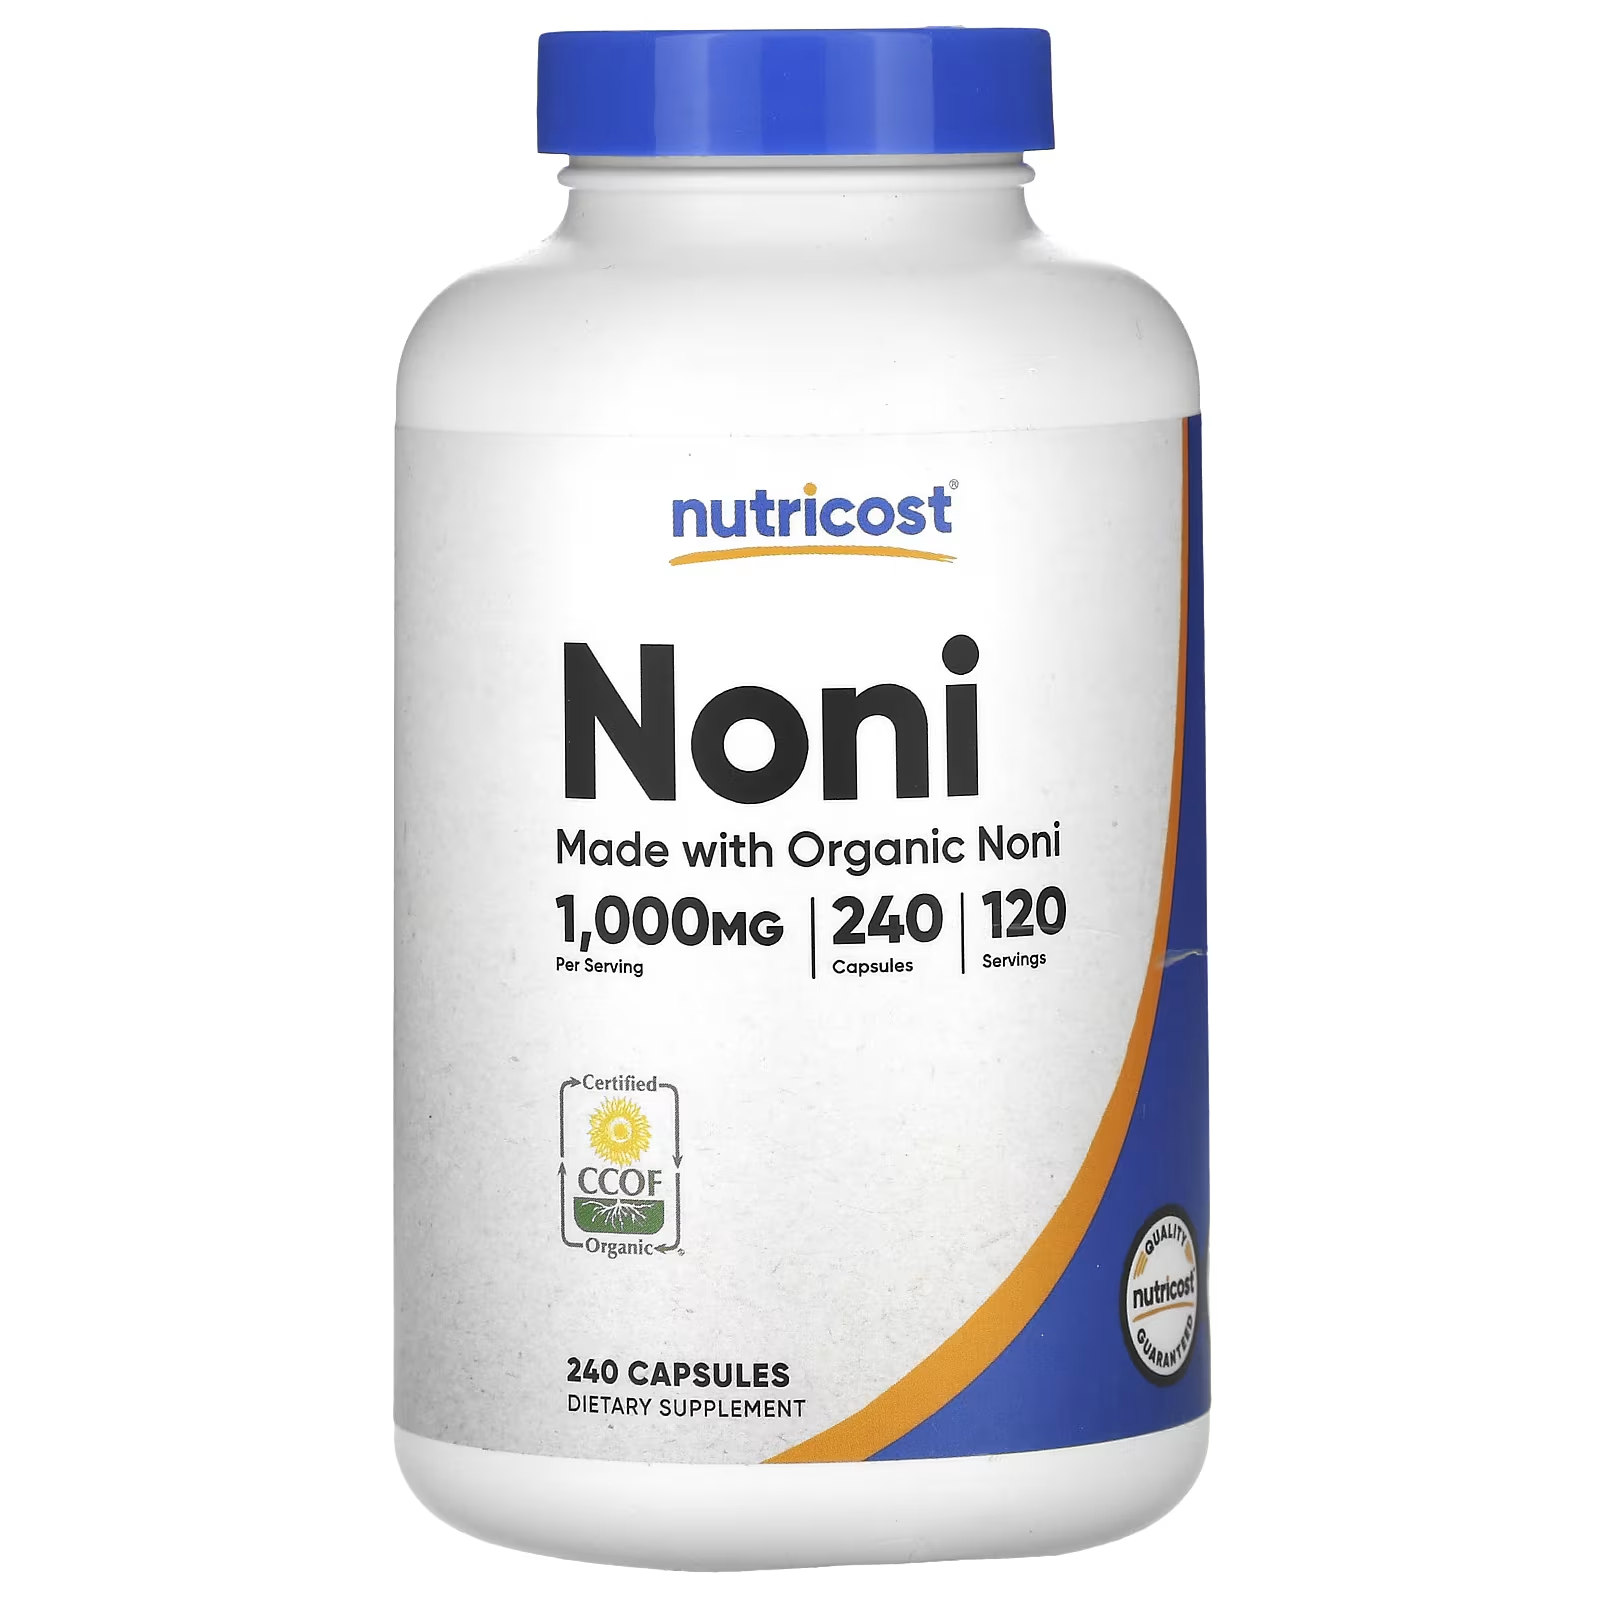 Nutricost Noni 1000 мг 240 капсул (500 мг в капсуле) nutricost расторопша 1000 мг 240 капсул